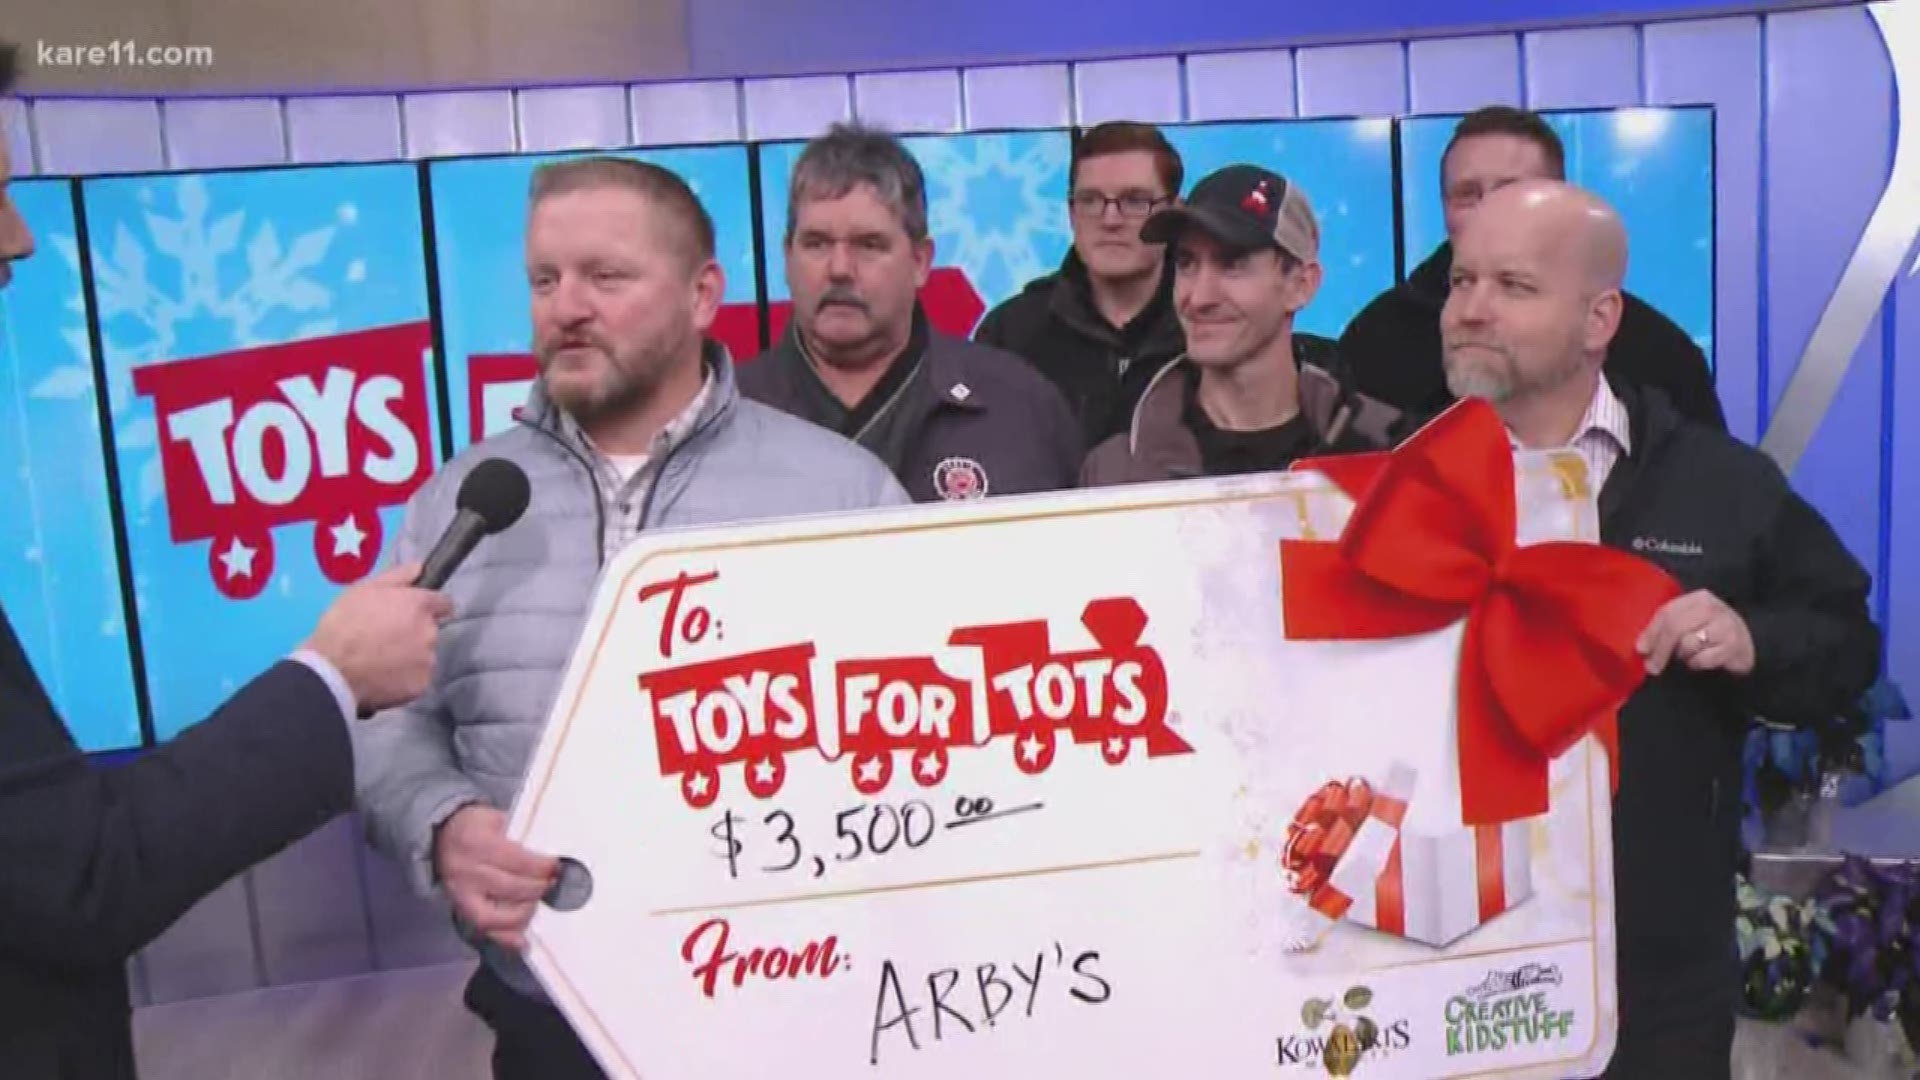 The 10 p.m. segment of Toys for Tots on Wednesday, December 12, 2018.